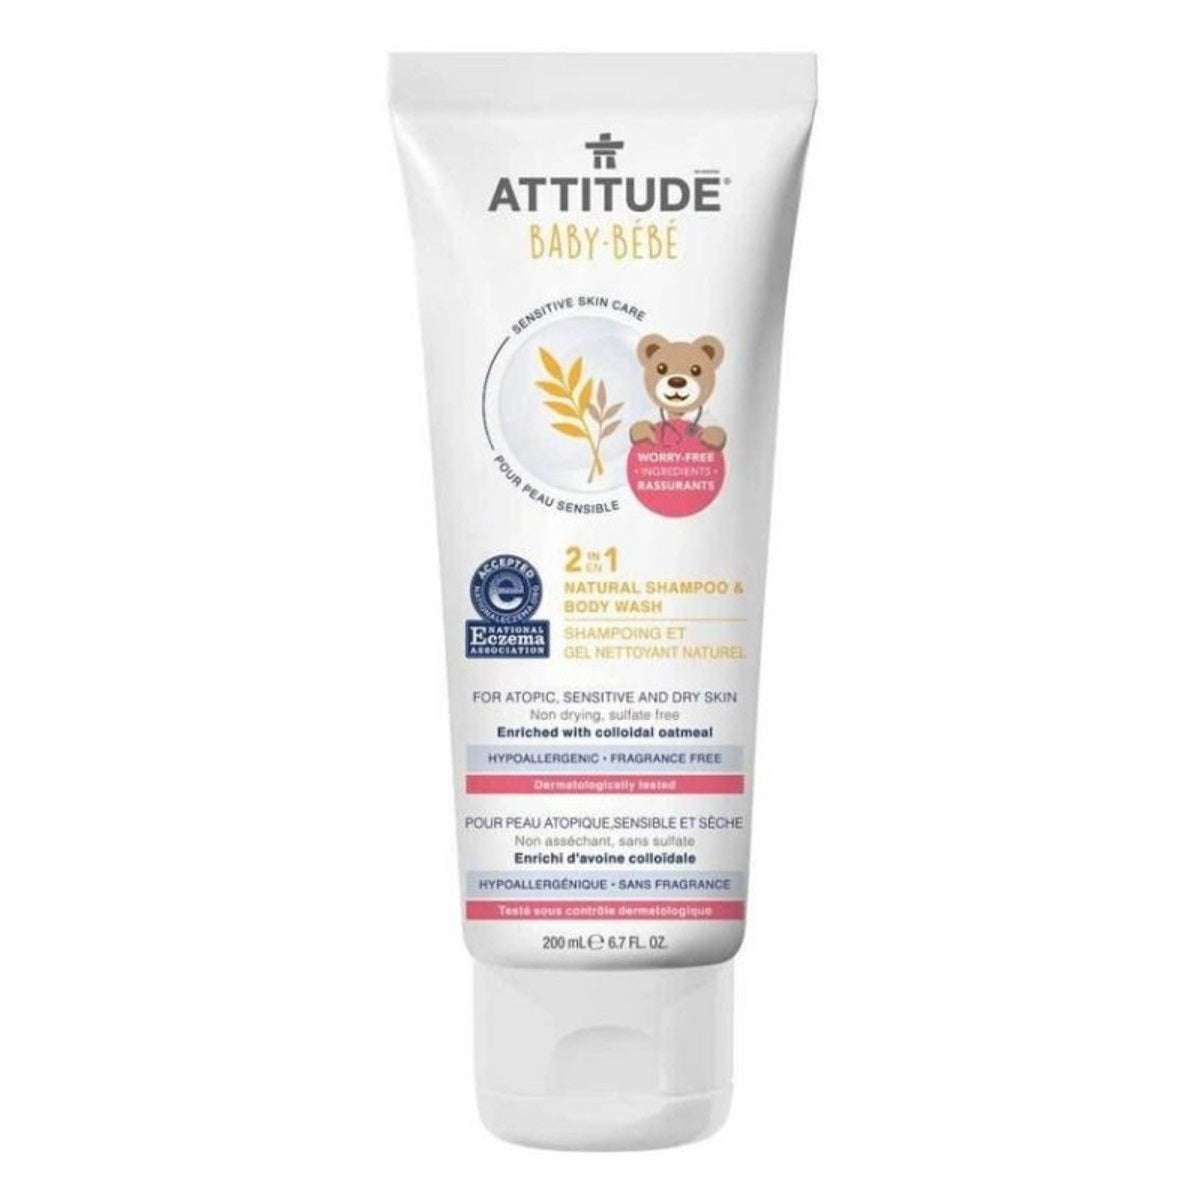 Product label for ATTITUDE Sensitive Skin Baby 2 in 1 Natural Shampoo & Body Wash (200 mL)